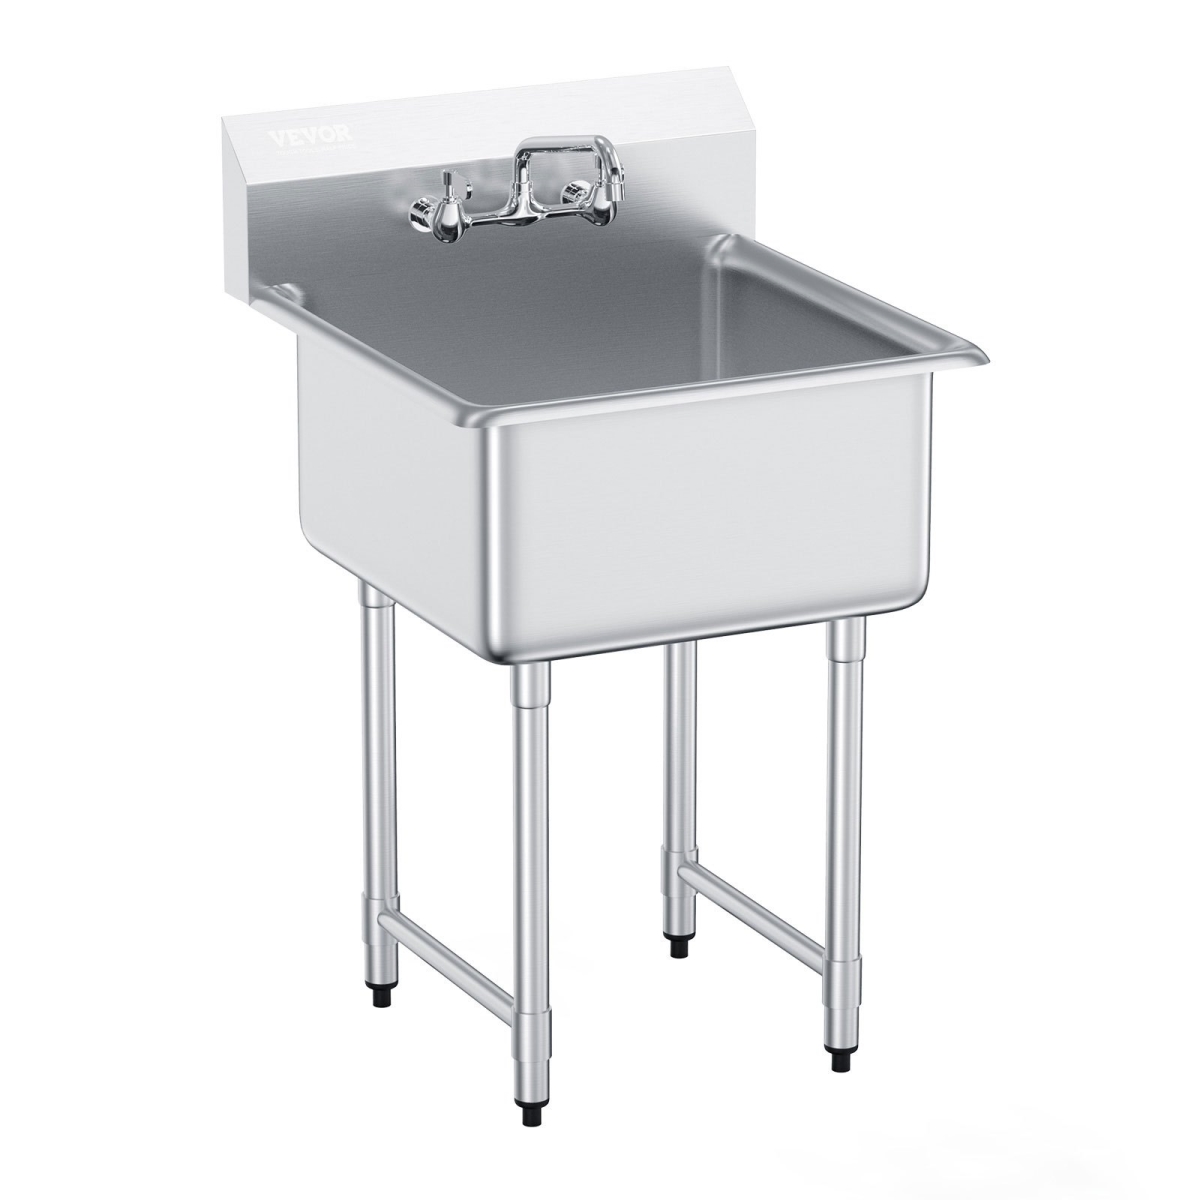 Picture of Vevor SYLSSCDCY2424TYZPV0 27 x 41 in. Stainless Steel Prep & Utility Compartment Free Standing Small Commercial Single Bowl Sinks